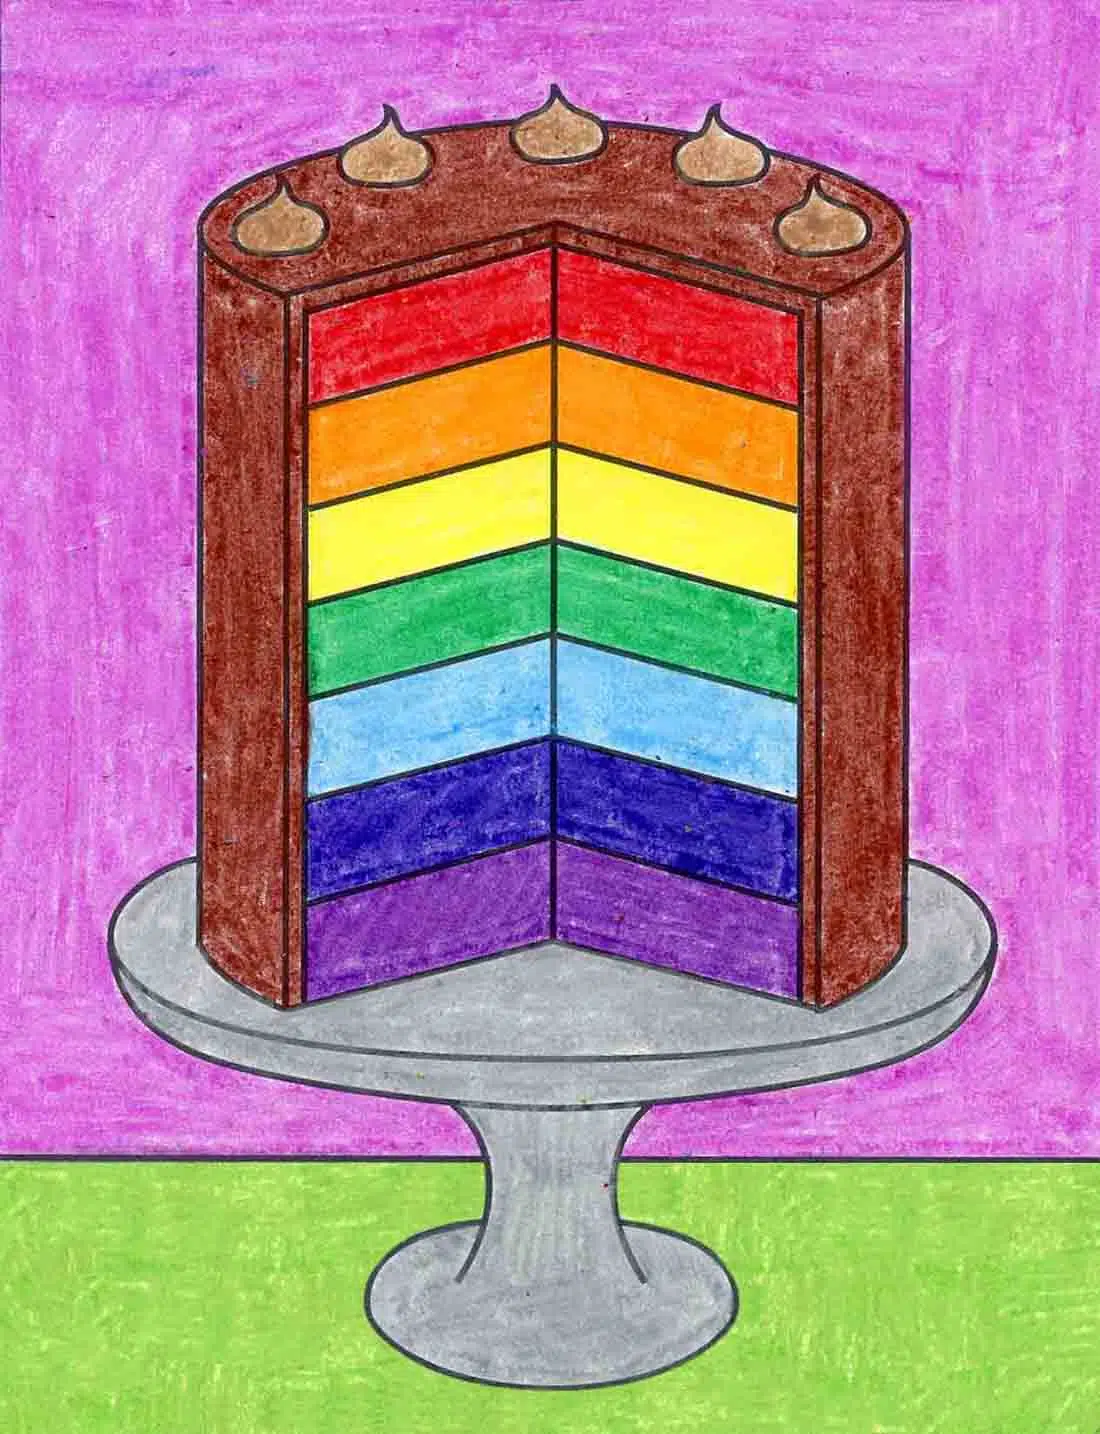 Easy How to Draw a Cake Tutorial and Cake Coloring Page